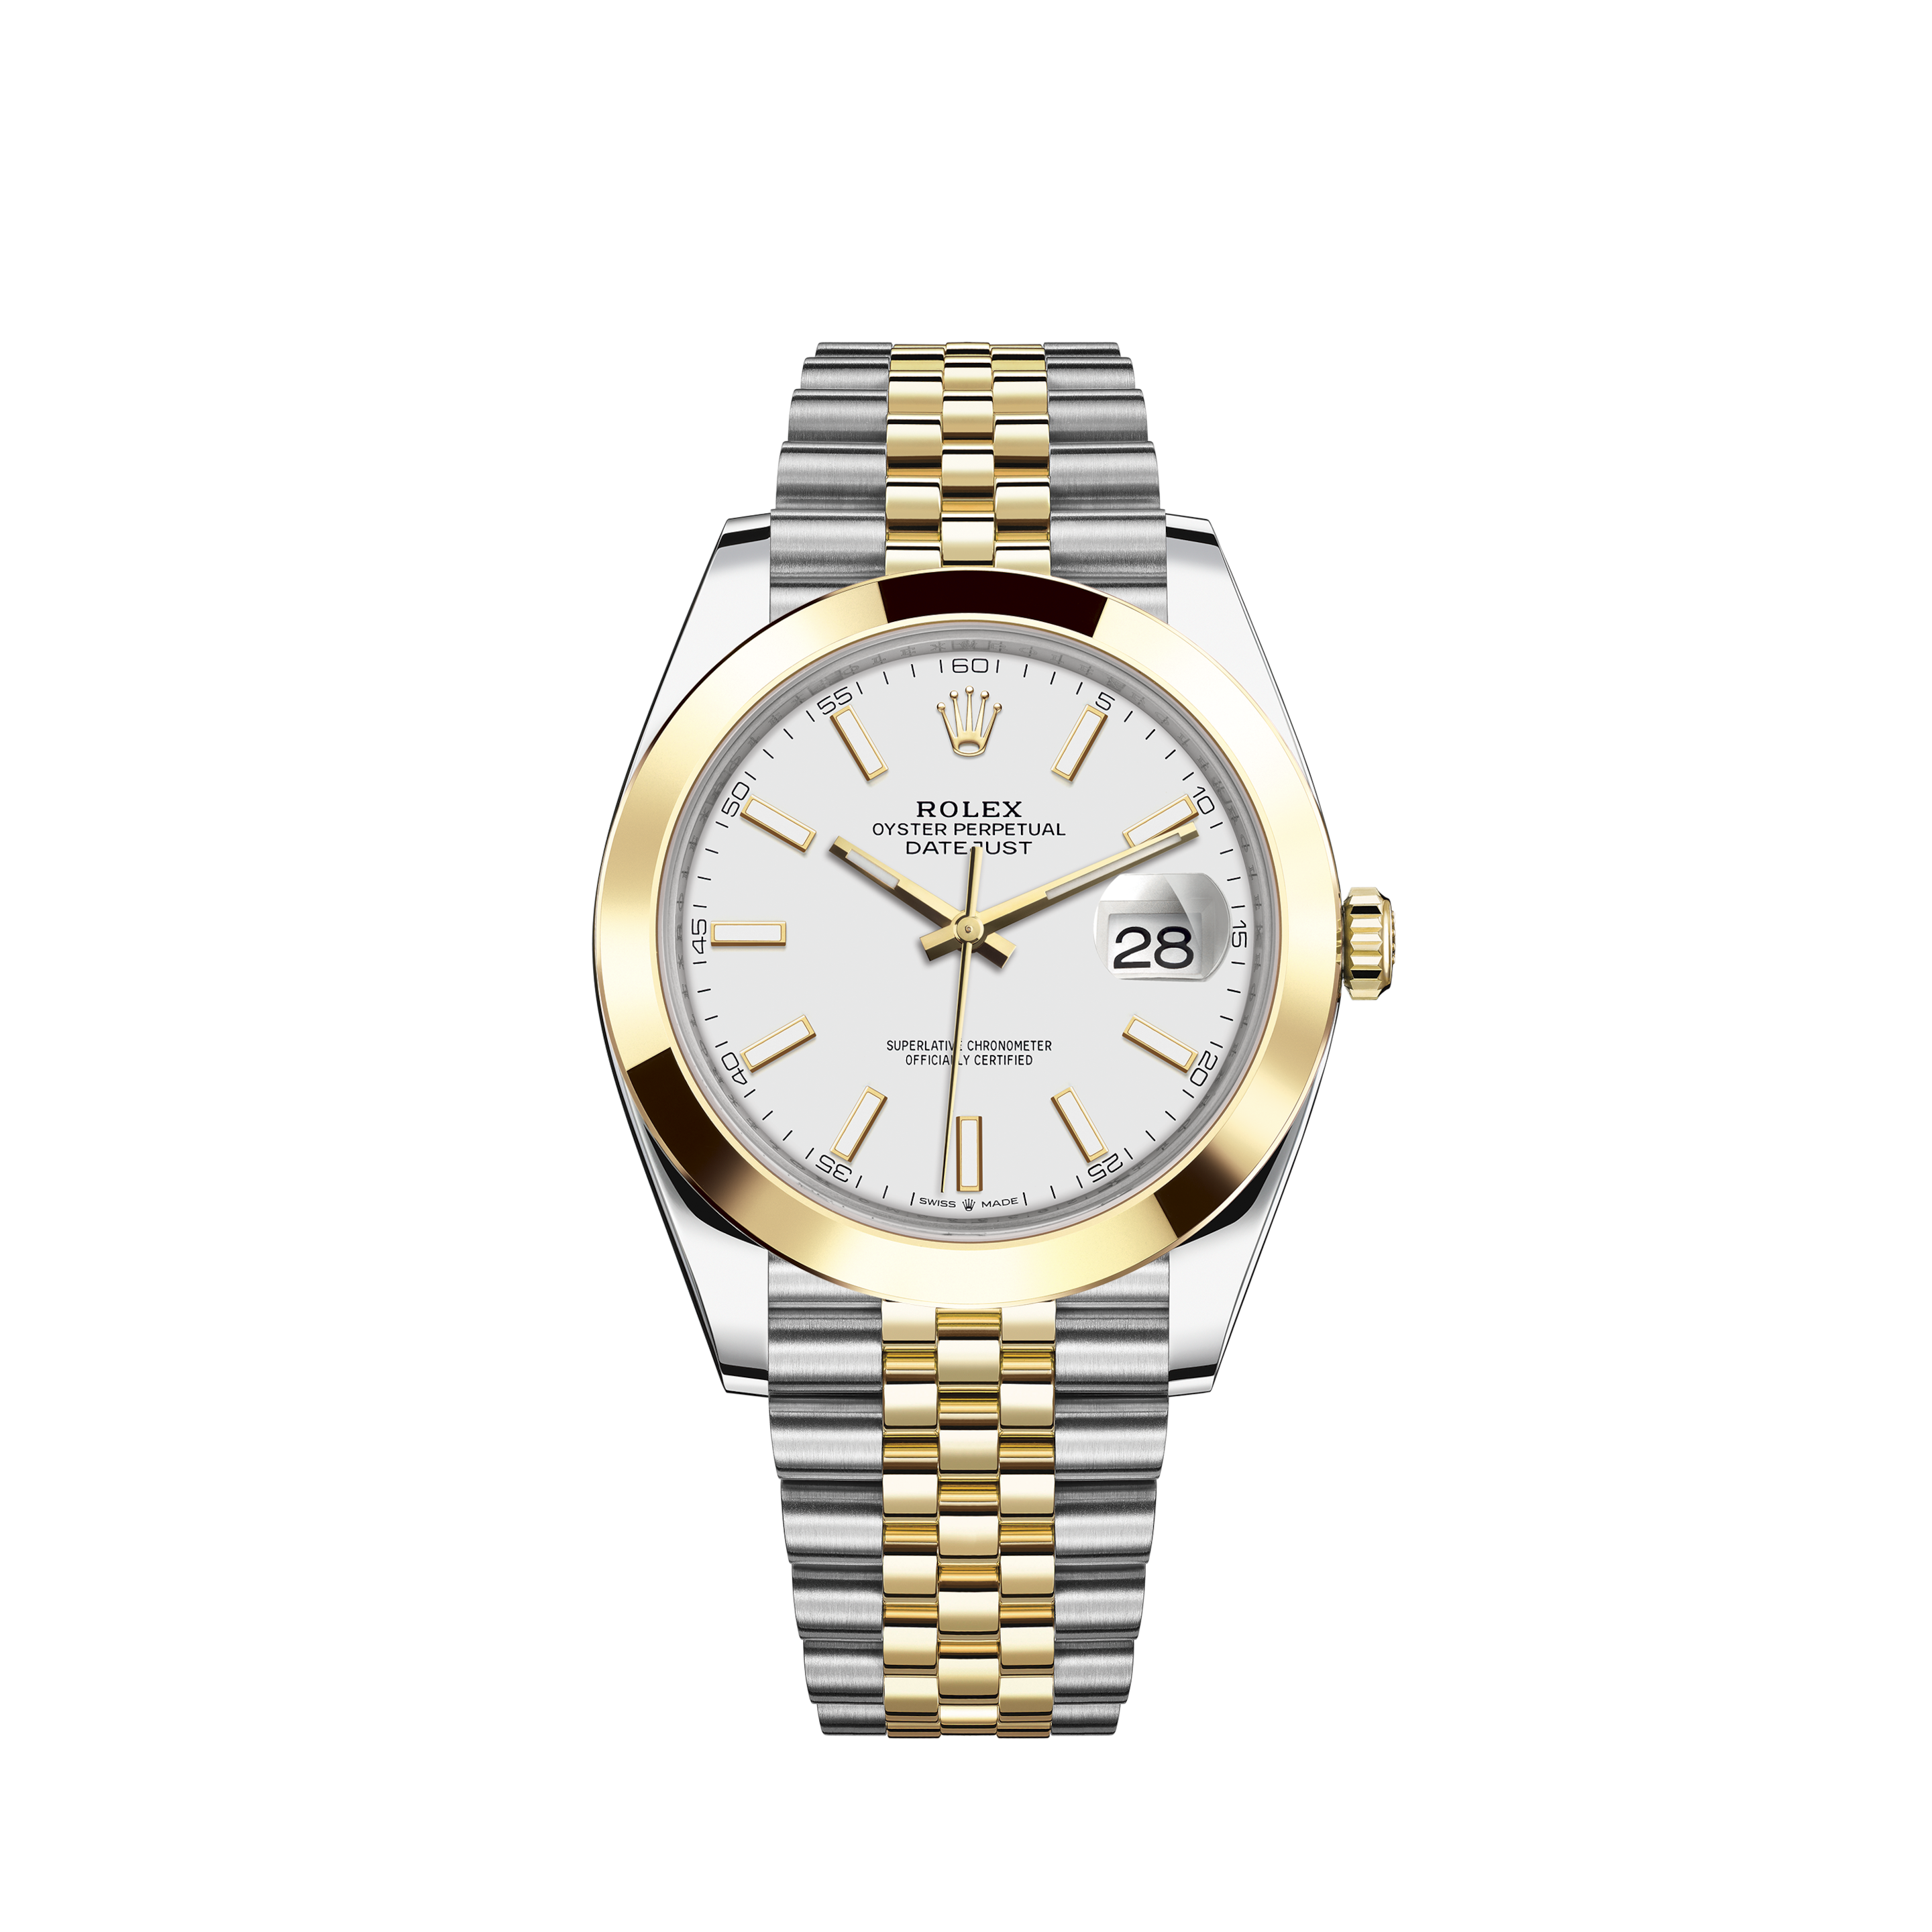 Rolex Oyster Perpetual Date Sigma dial year 1973